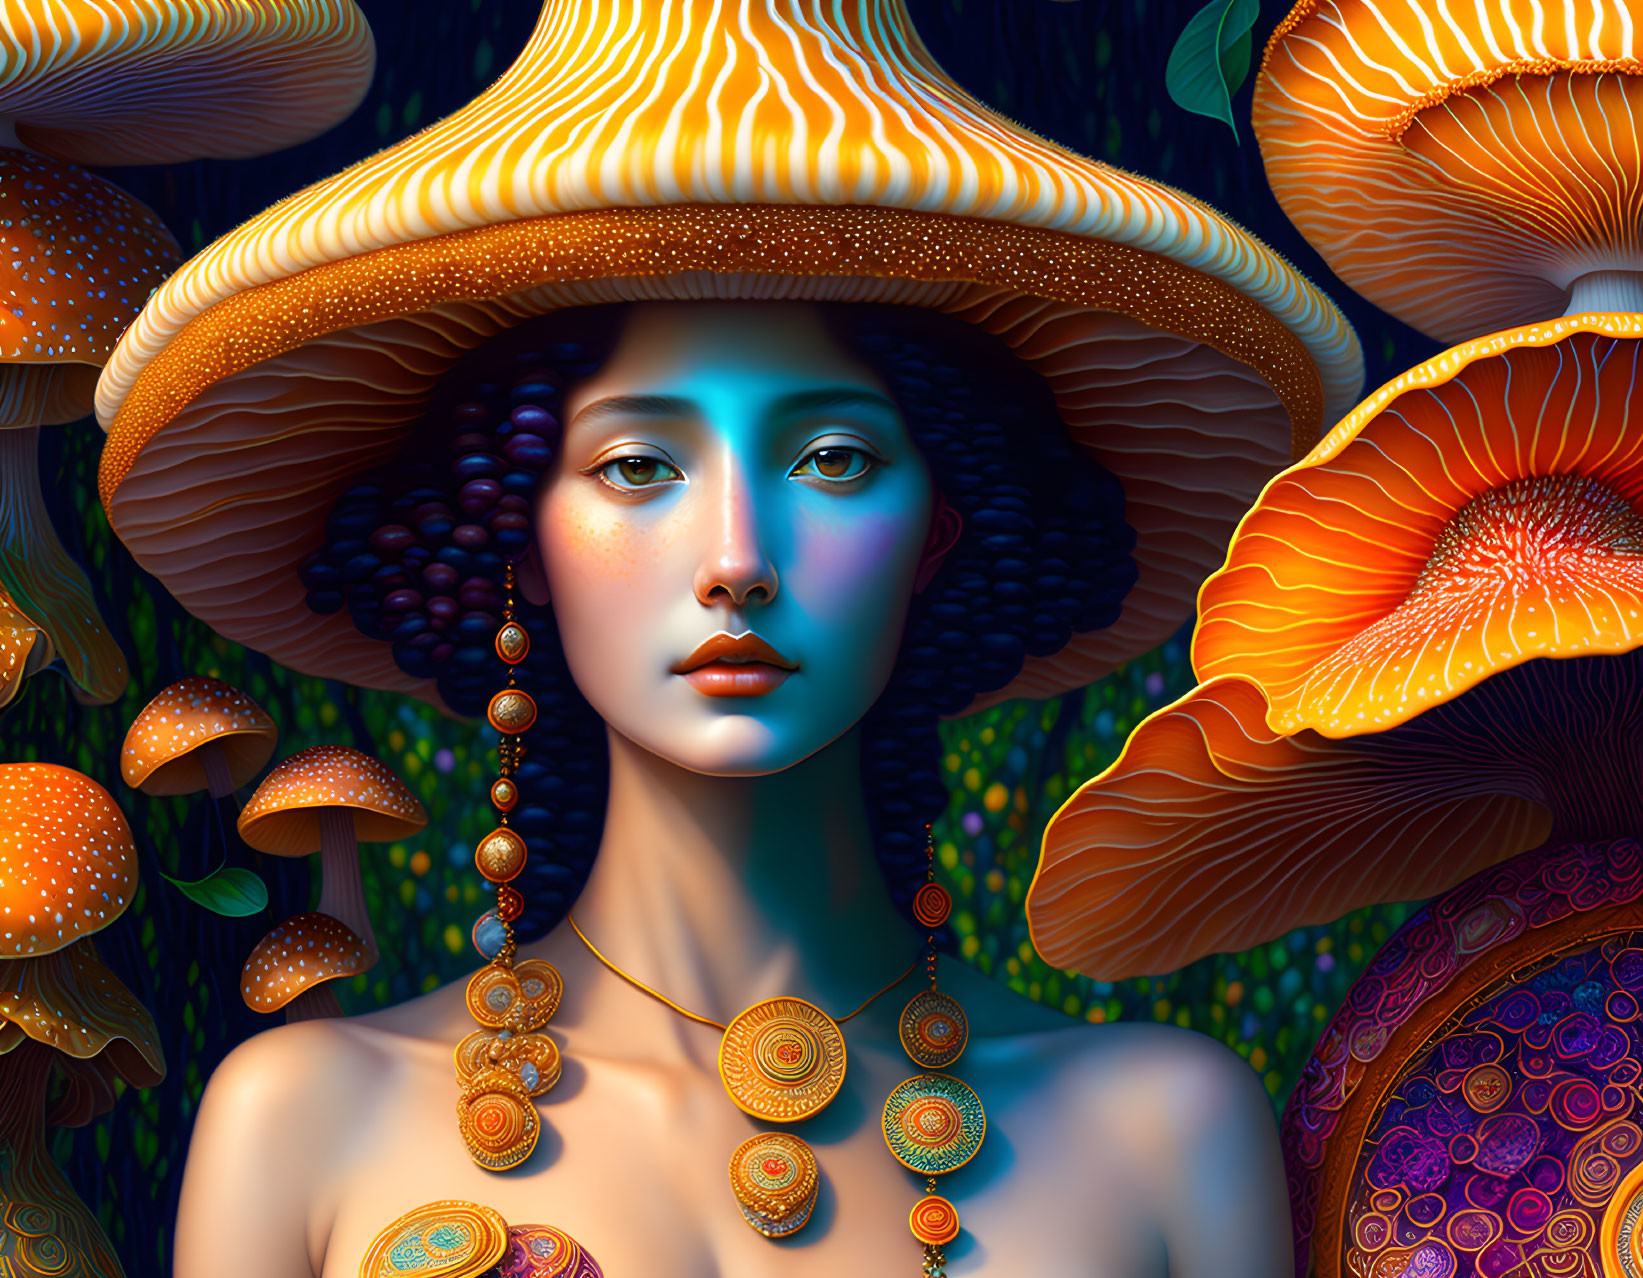 Digital painting of woman with mushroom cap hat, surrounded by vibrant mushrooms